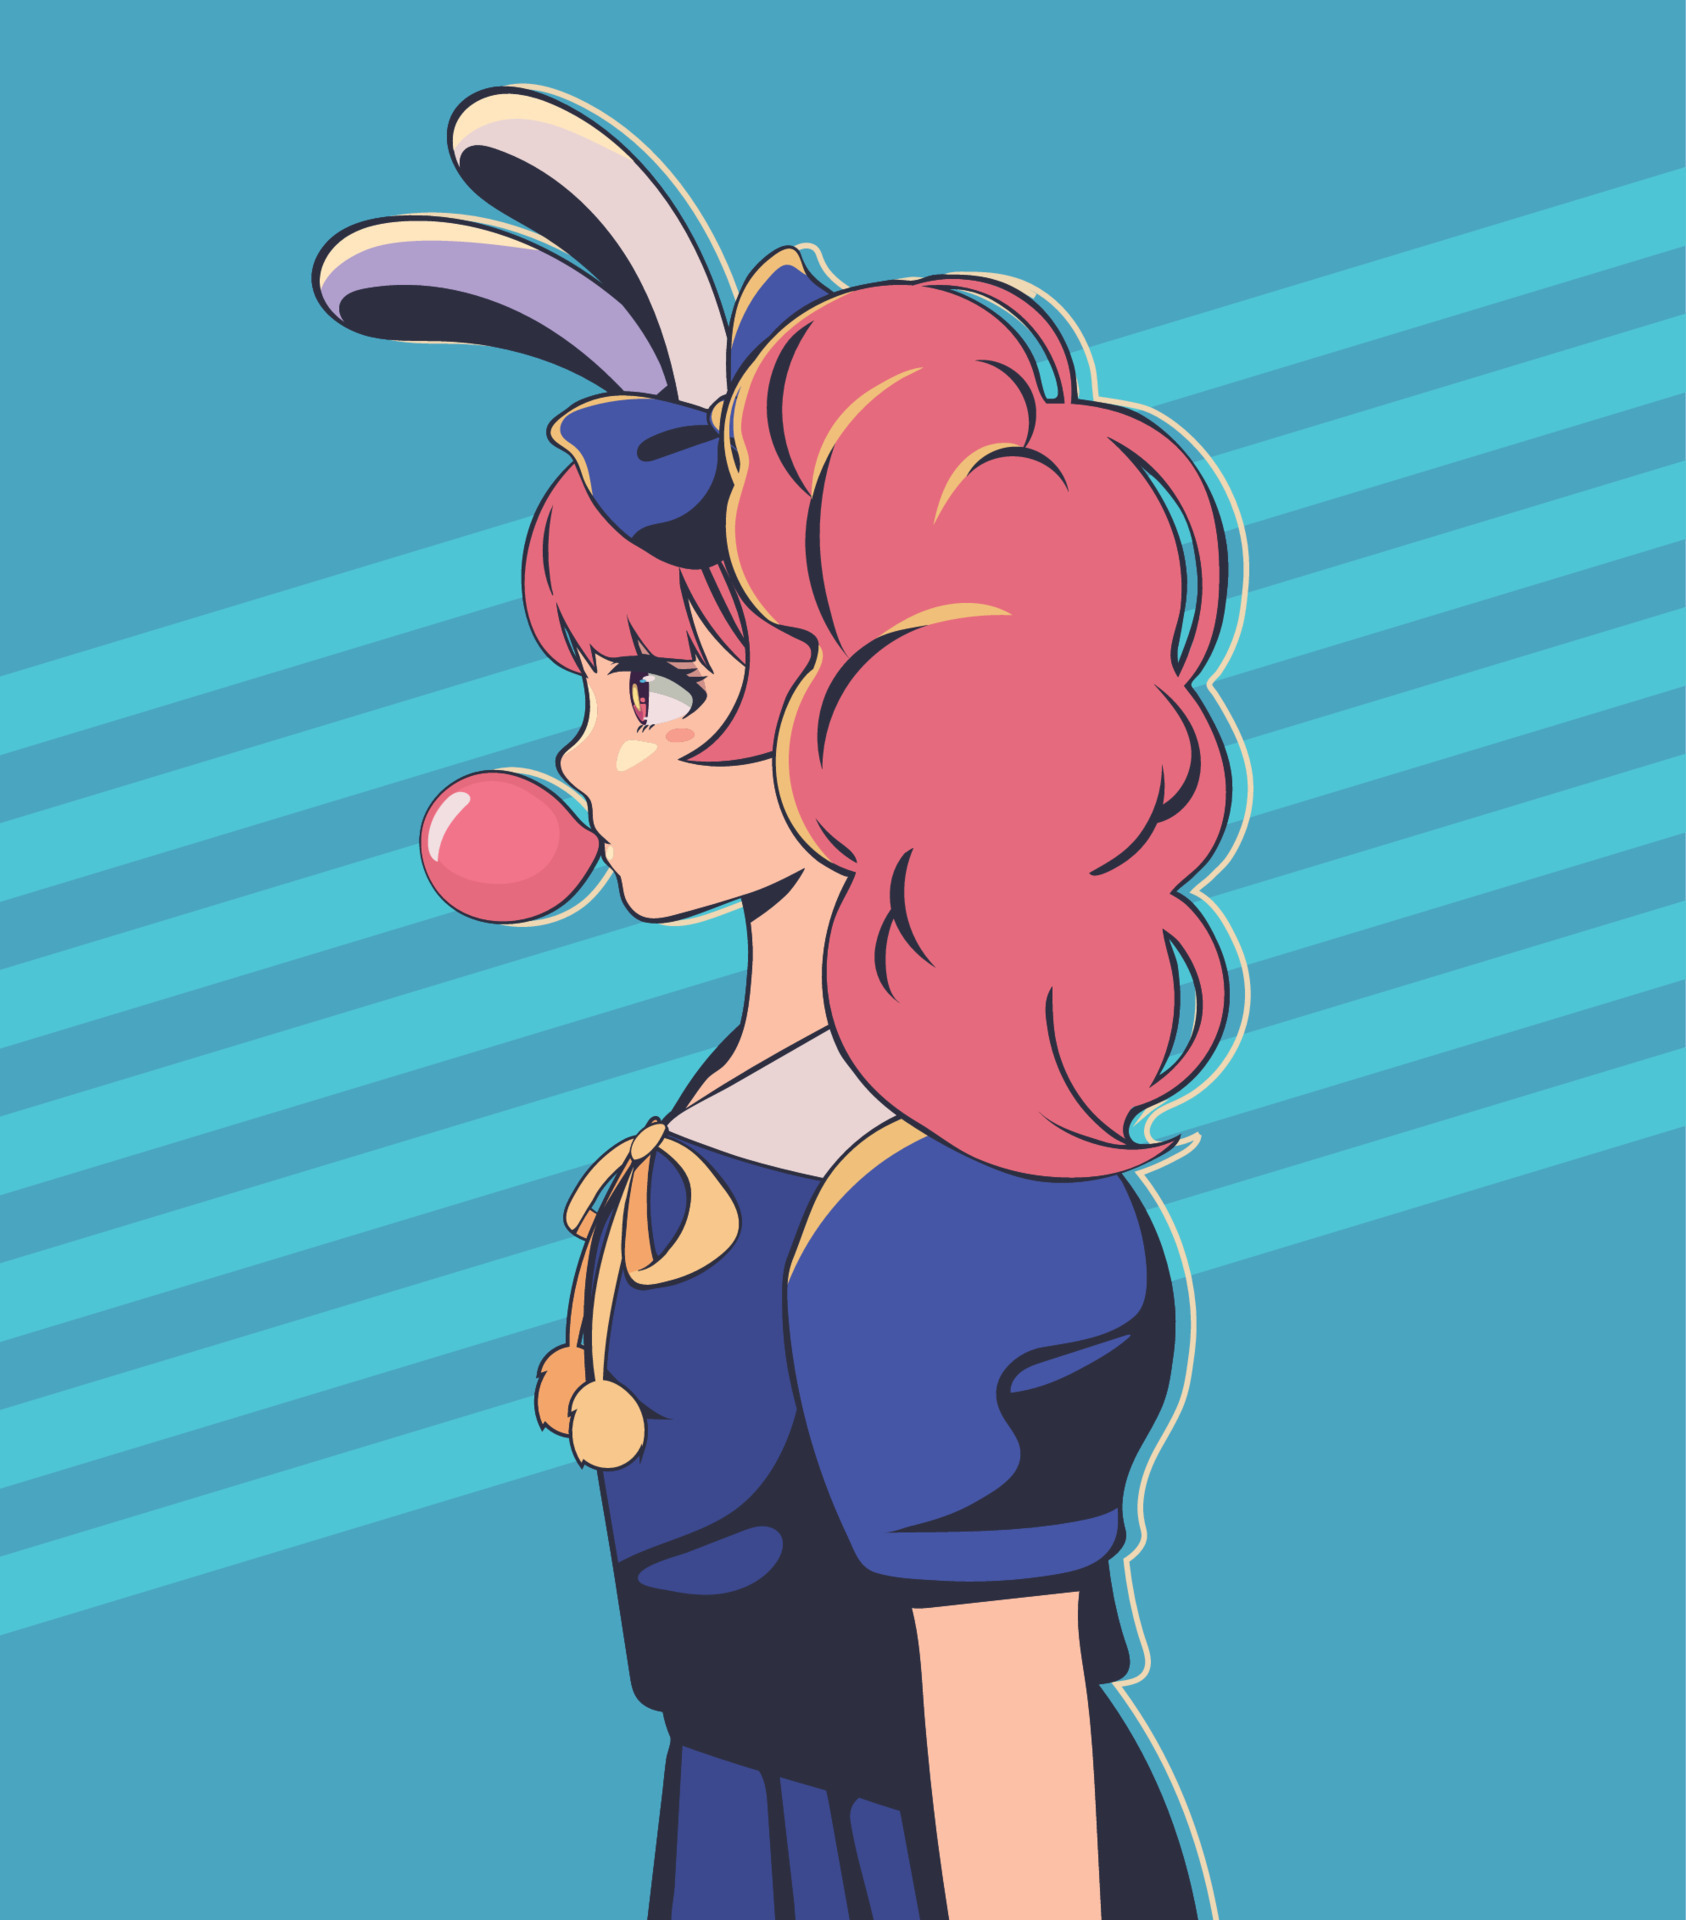 Anime Bubble Gum Blowing - 531x604 PNG Download - PNGkit